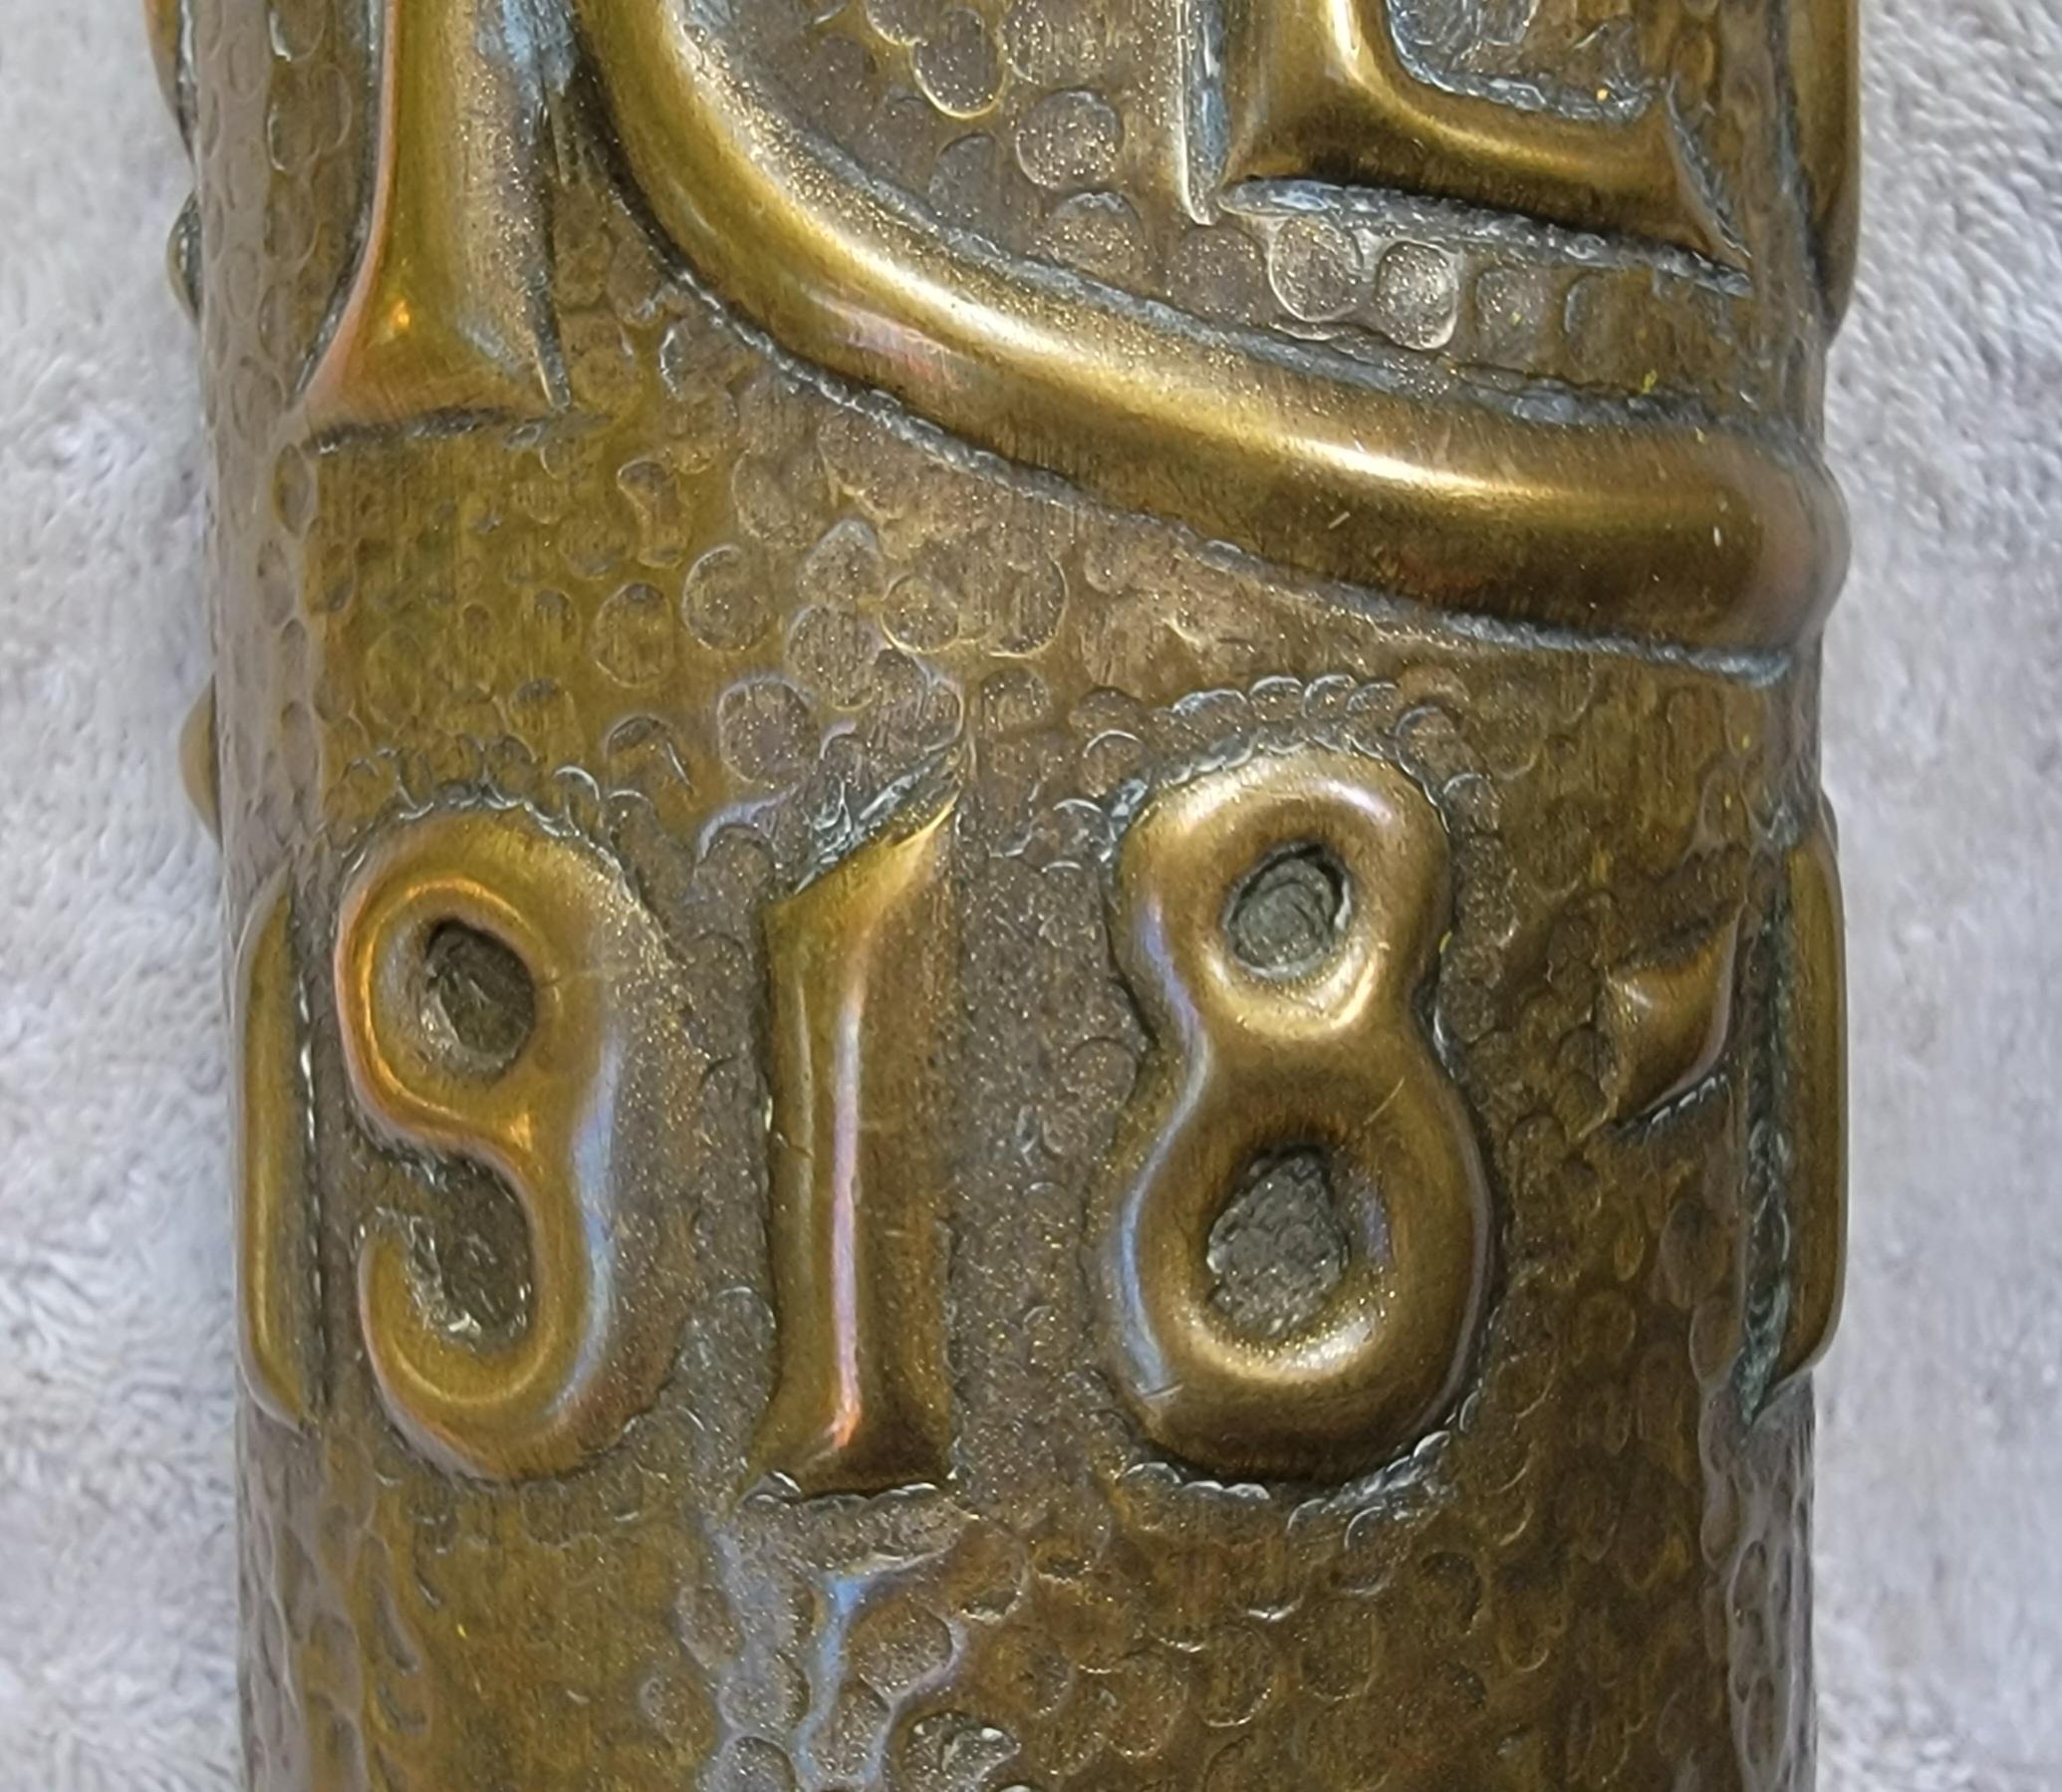 Trench Art Vase Dated 1918-19 For Sale 1